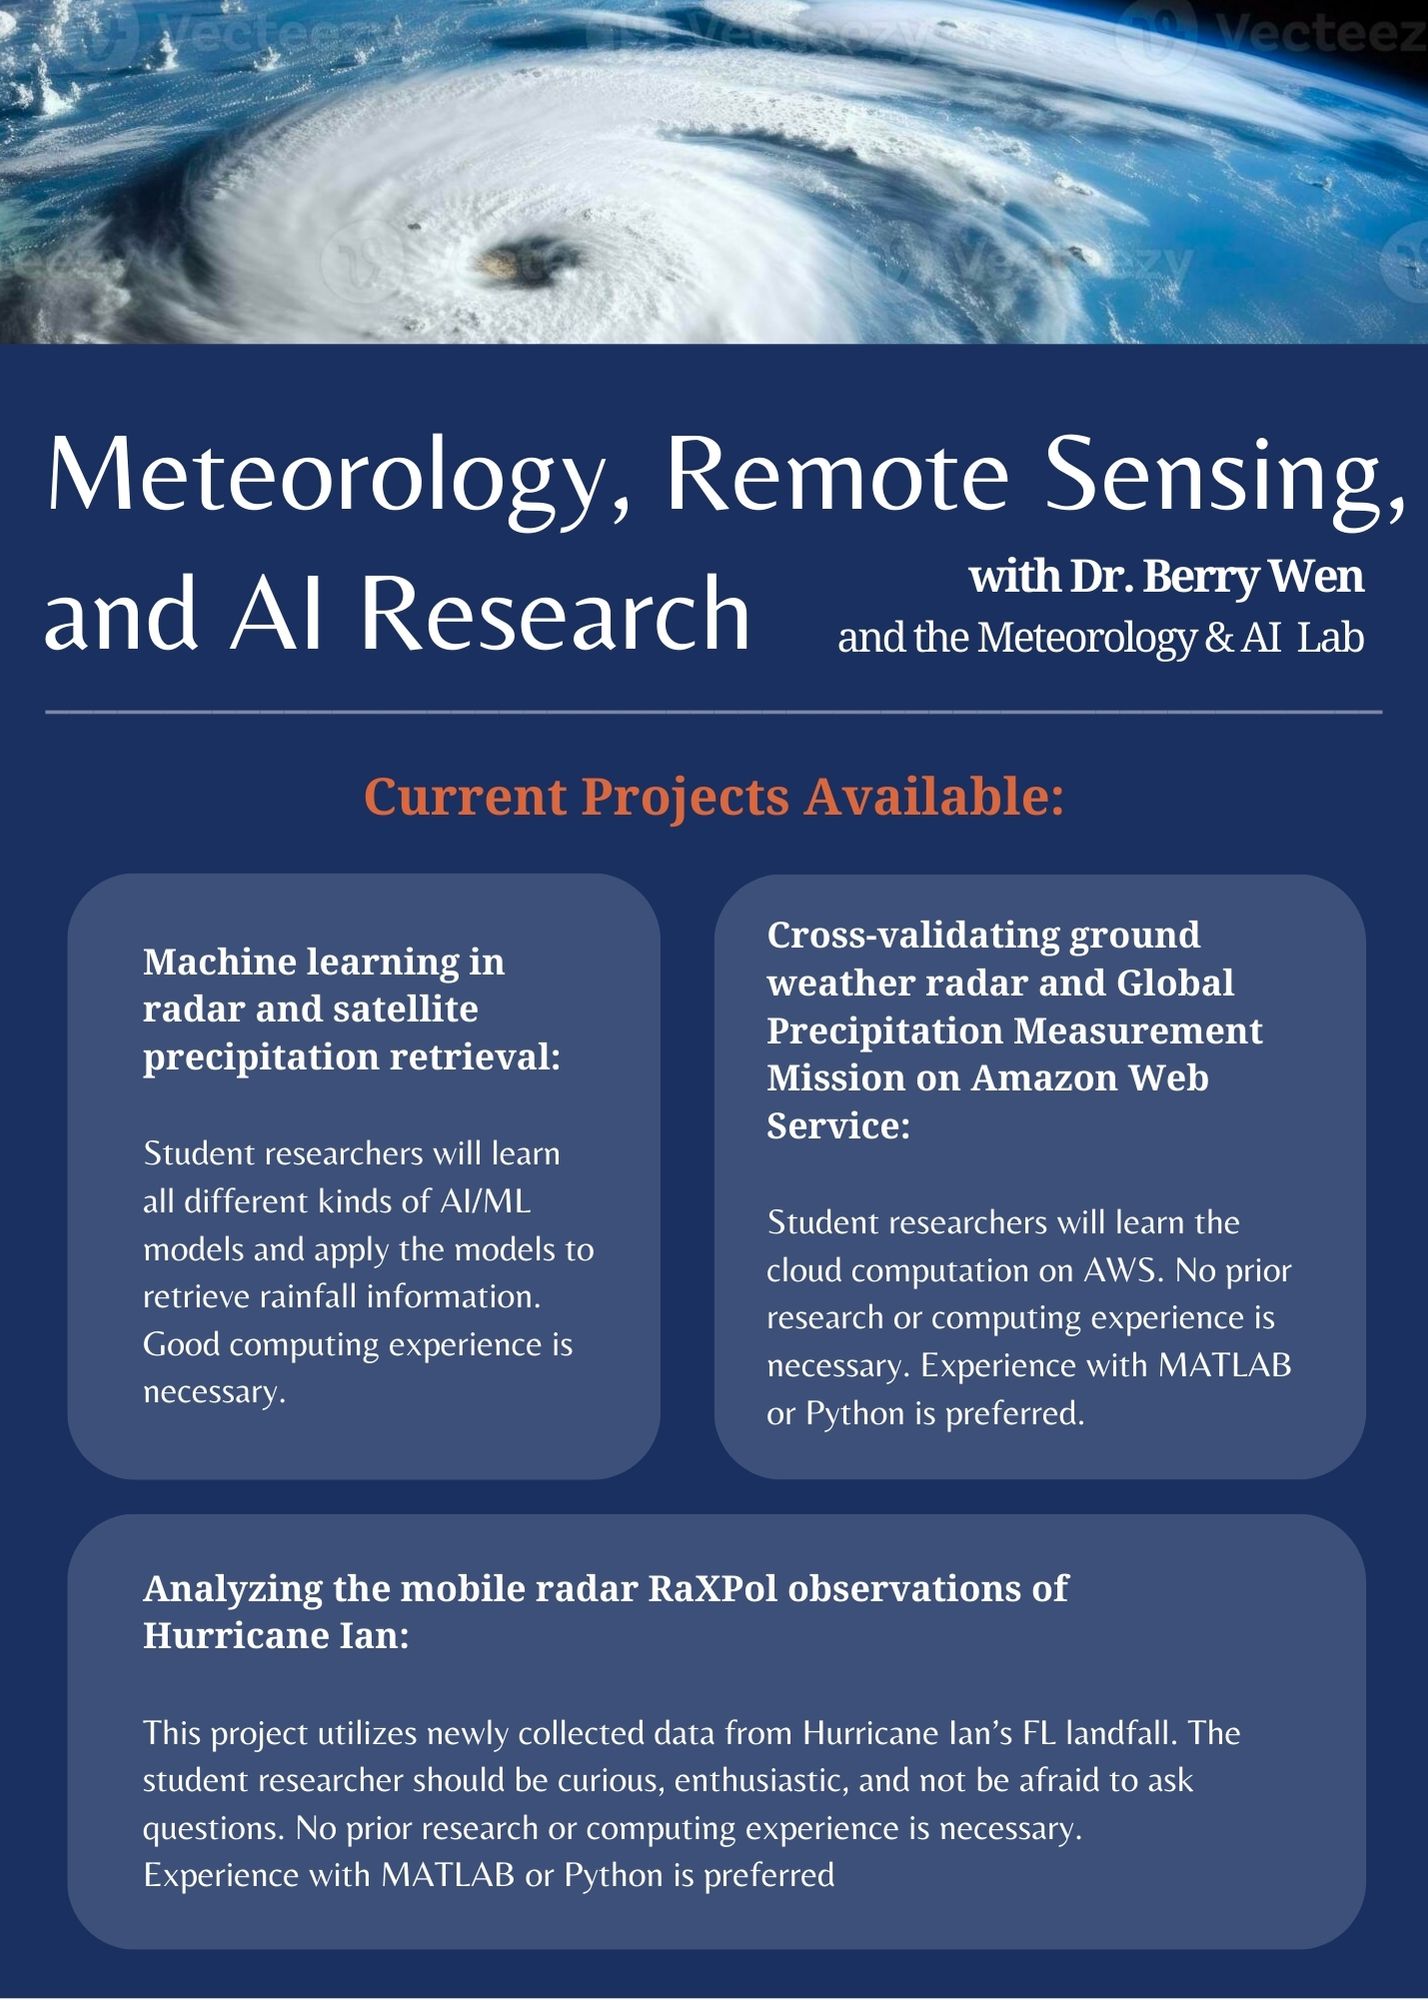 Meteorology, remote sensing, and AI research with Dr. Berry Wen